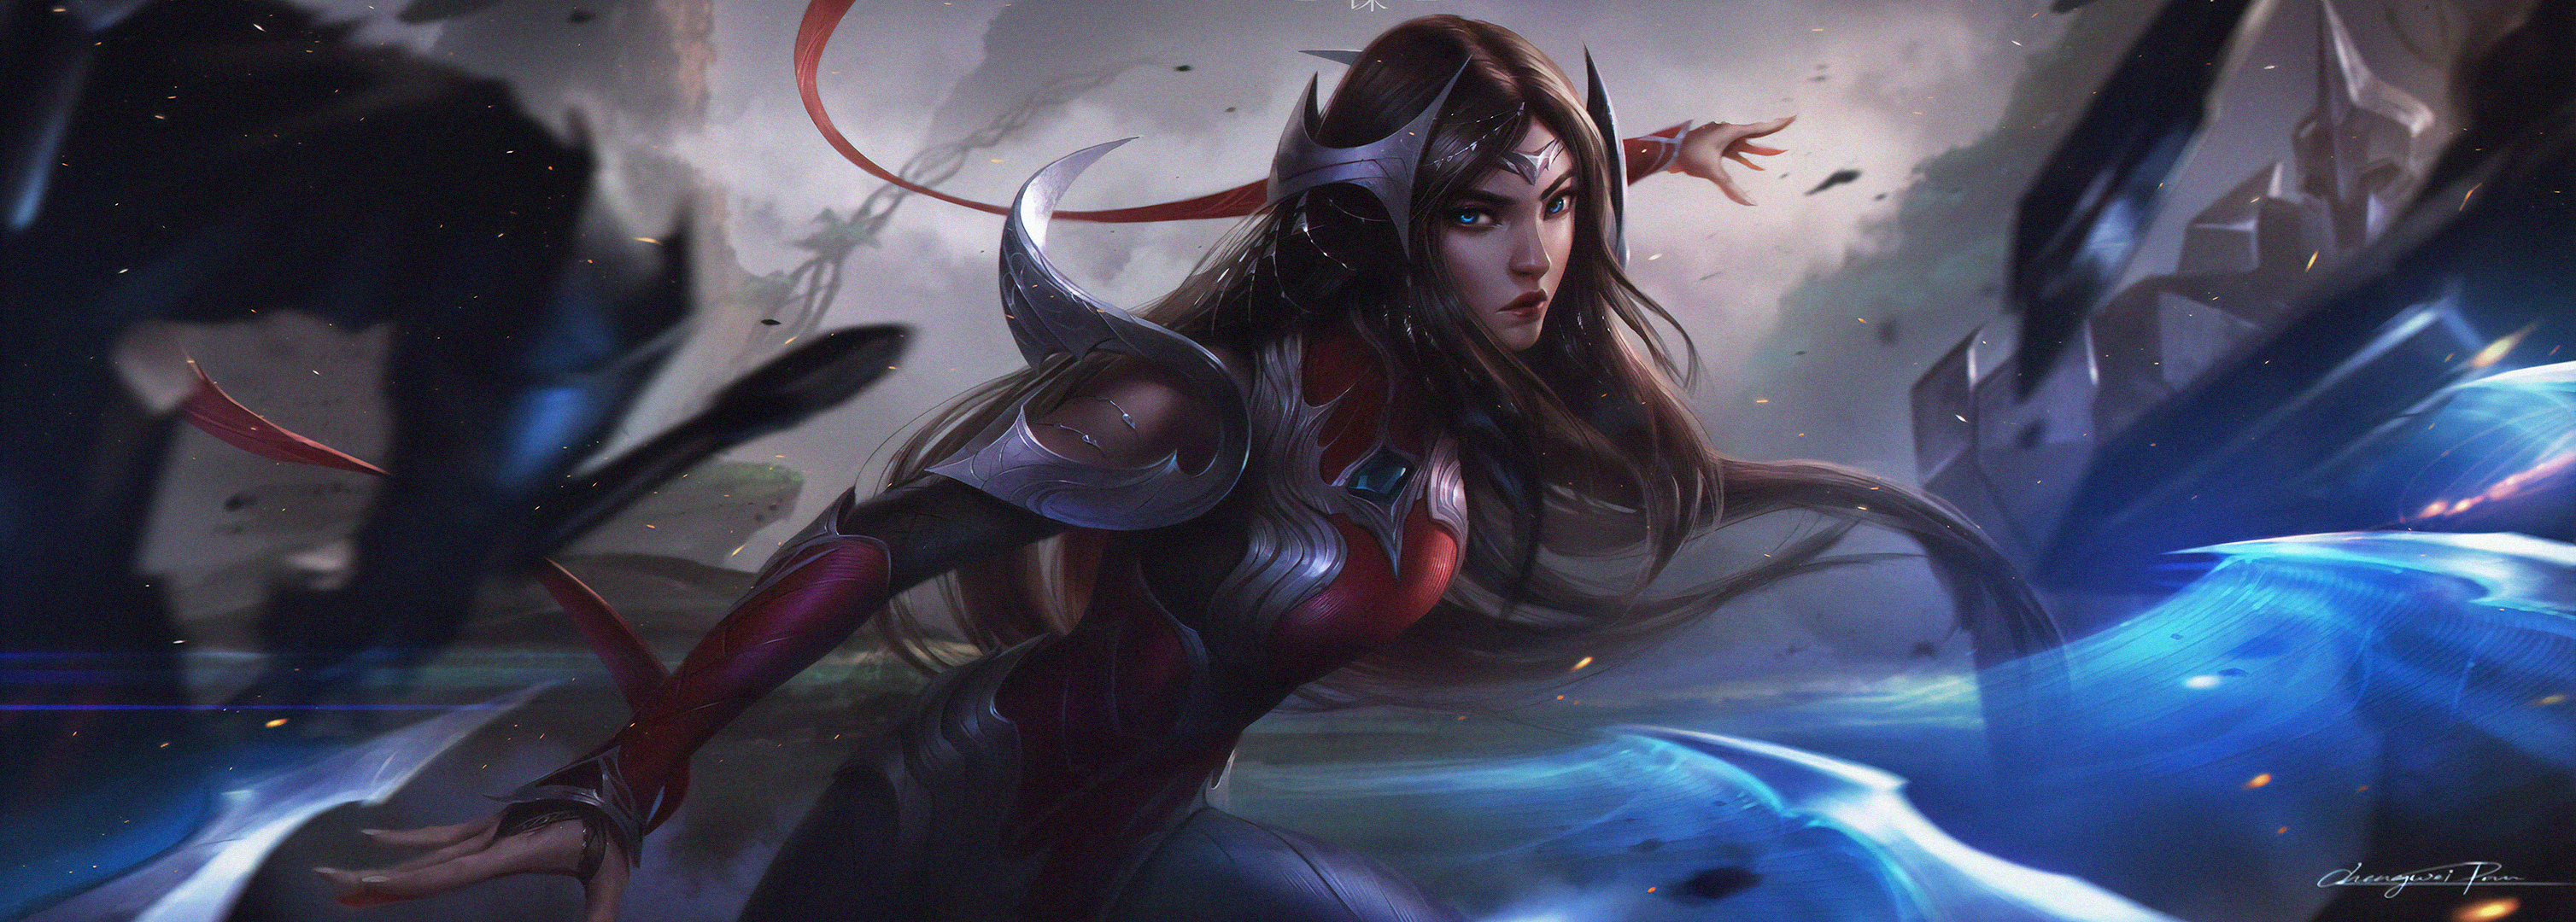 Irelia league of legends art hd games k wallpapers images backgrounds photos and pictures